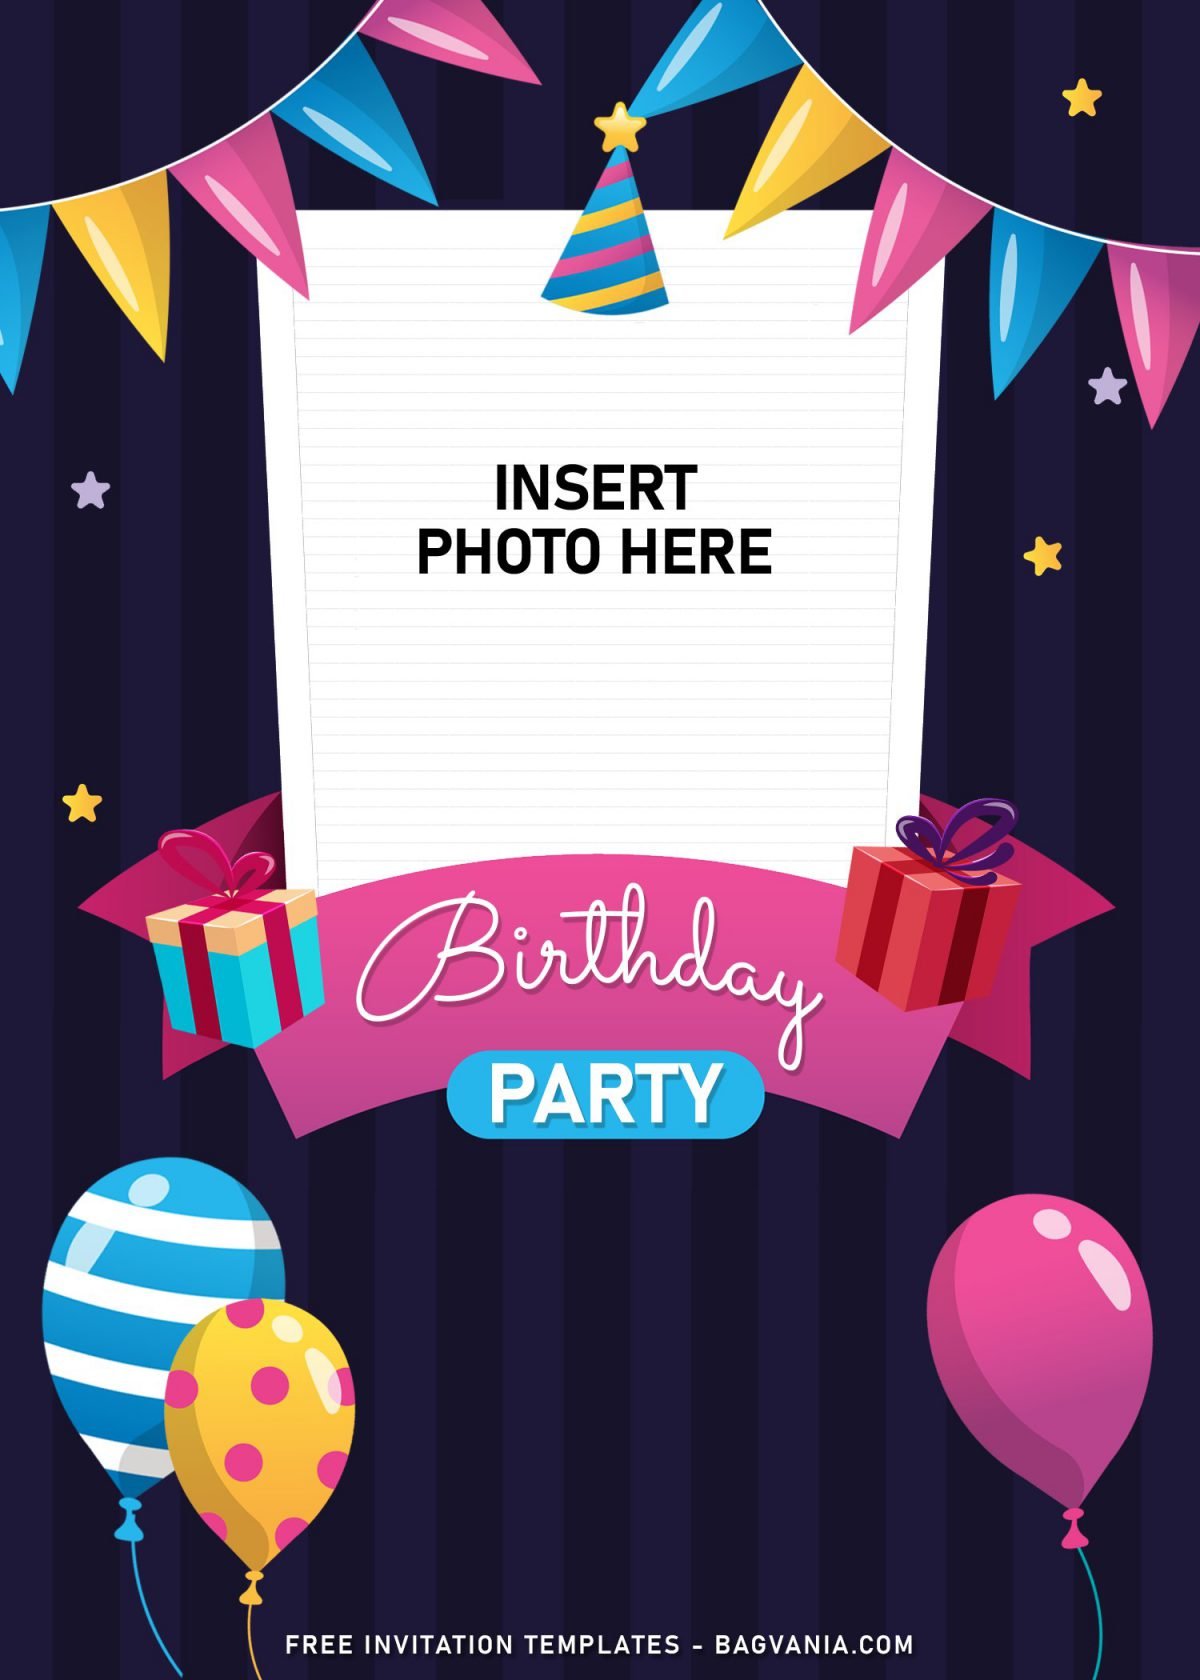 11+ Fun Birthday Invitation Templates For Your Kid’s Upcoming Birthday Party and has adorable pink ribbon and balloon